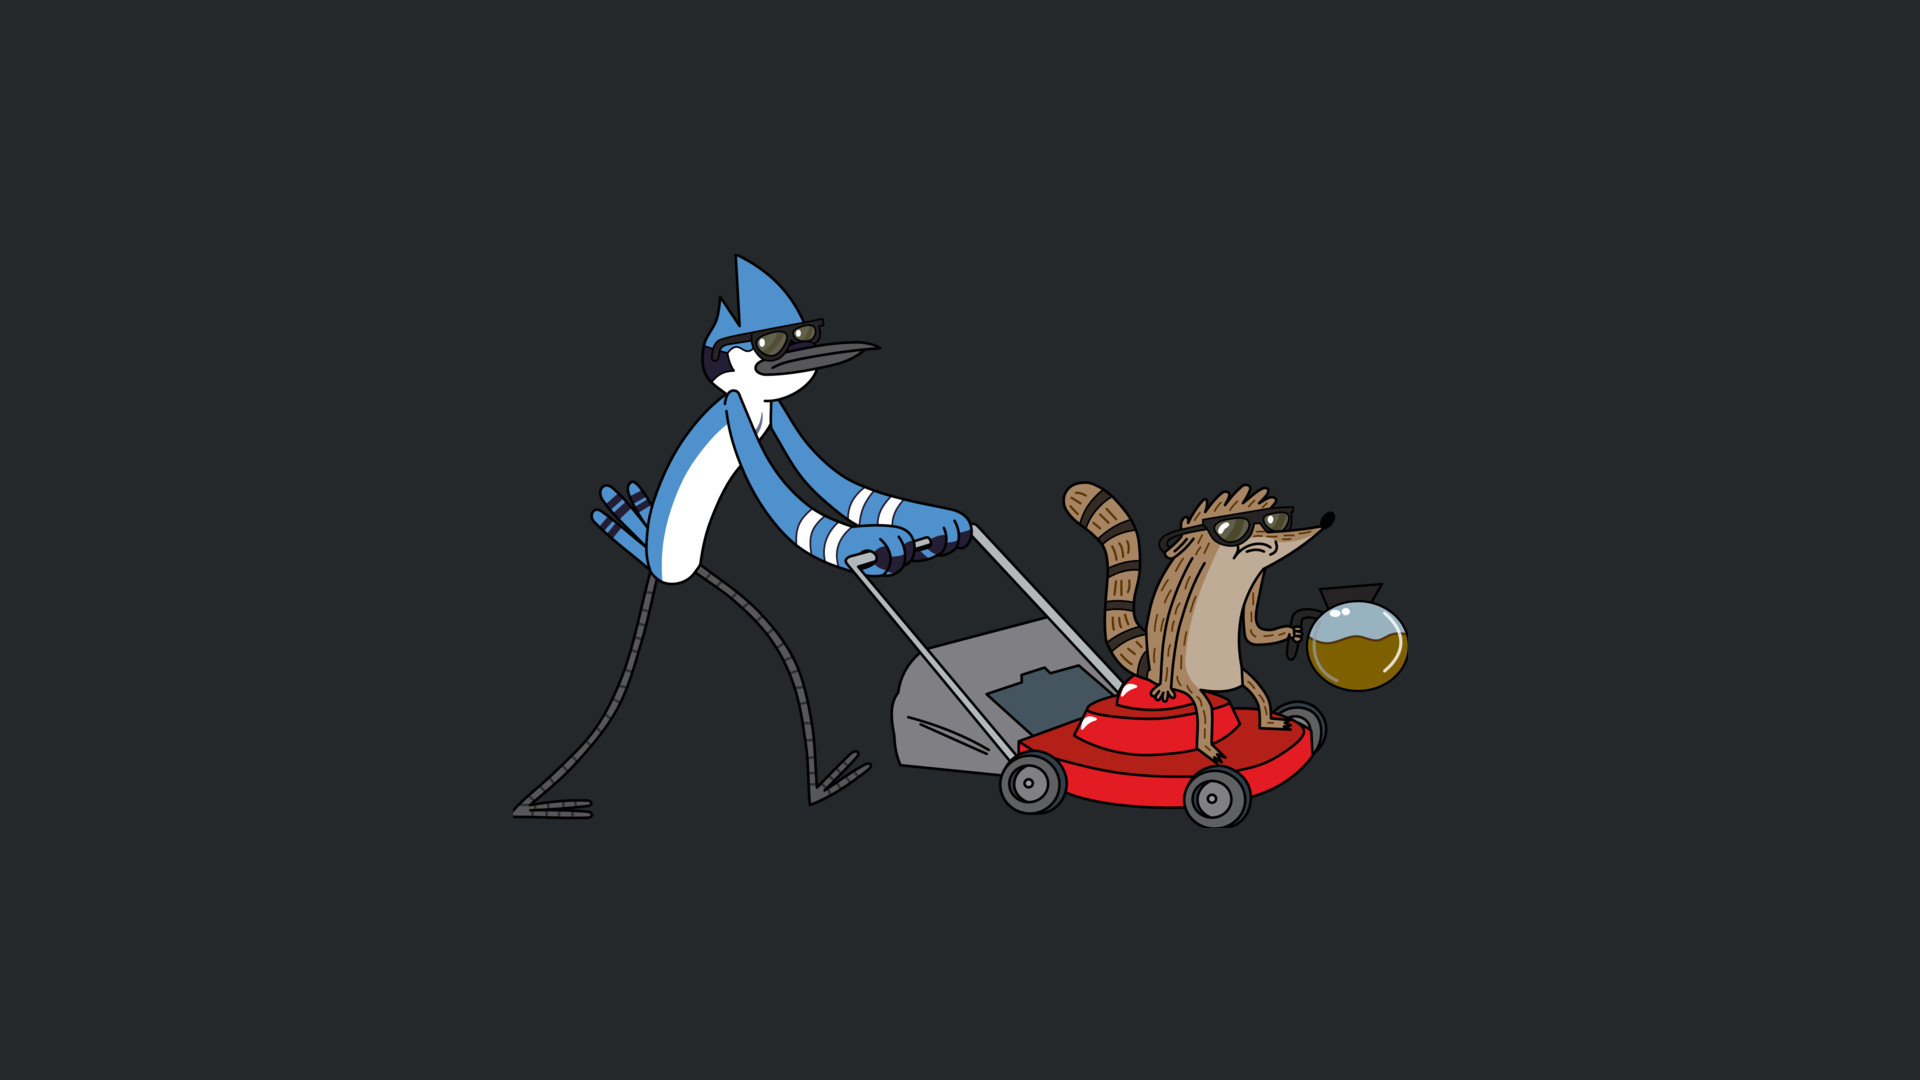 1920x1080 ... Regular Show Wallpapers, HDQ Regular Show Images Collection for .